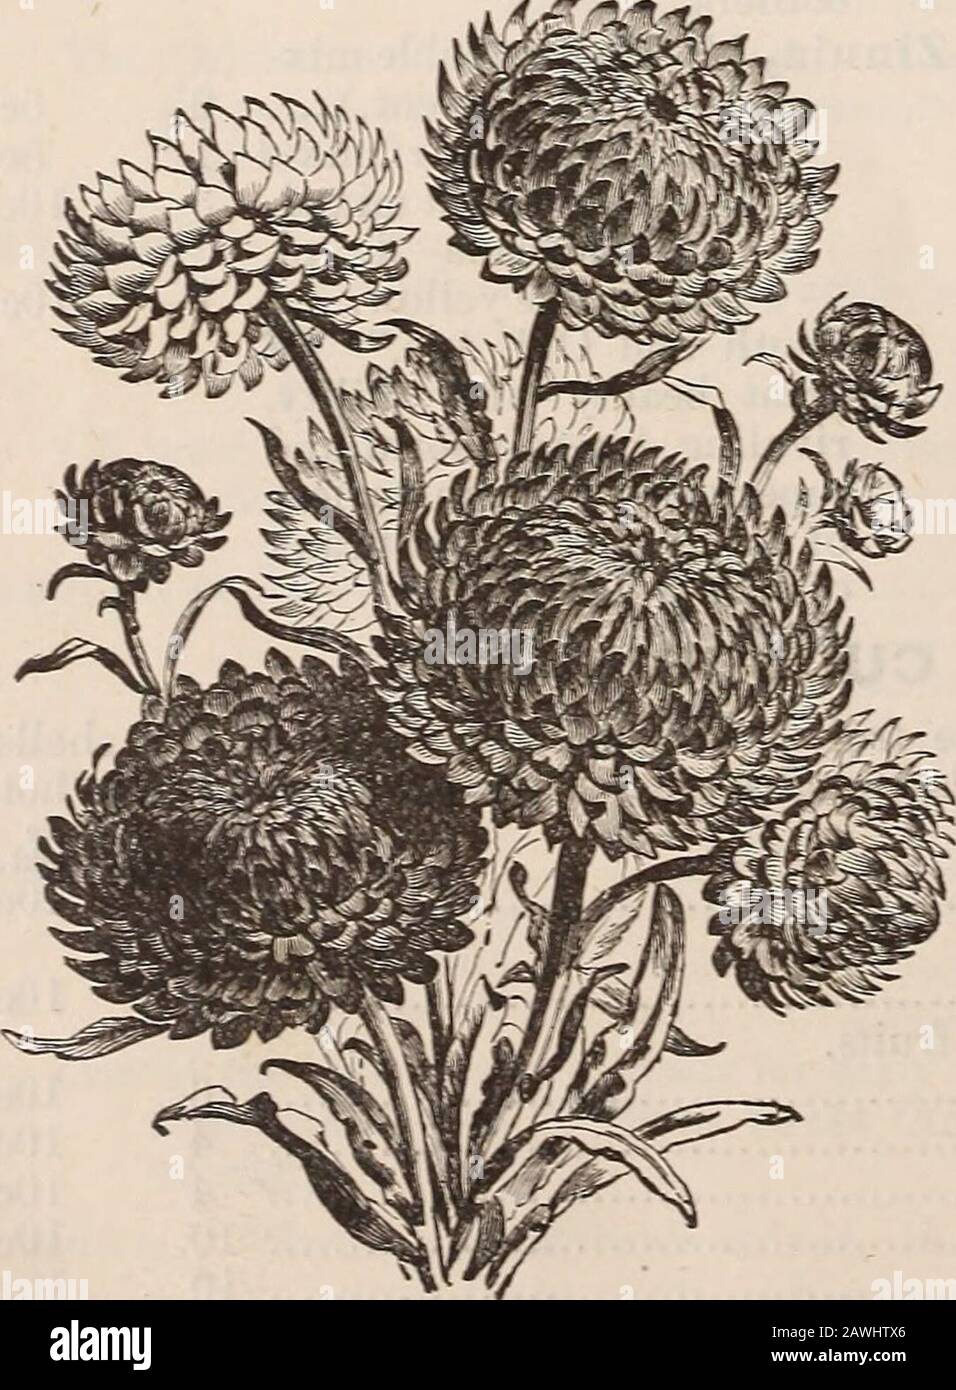 Catalogue of seeds, agricultural & horticultural supplies and guide for the garden, field & farm . Acroclinium Roseum, ^ White so eagerly sought Heliehrvsum, Yar. (riiaphalium Leontopodium. The true Alpine Edelweiss,for and so highly prized. Helichrysnni. Dwarf, double white (see cut) Crimson Mixed Tall, double pink White Mixed Bracteatum. Single yellow Straw Flowers. These will stand drought well.Should be grown in good soil, with abundanceof air. They make handsome bouquets whenmixed with ornamental grasses, b. Rhodantlie Maculata. Pink :&gt; Alba. White Manslesii. Bright rose Mixed The most Stock Photo